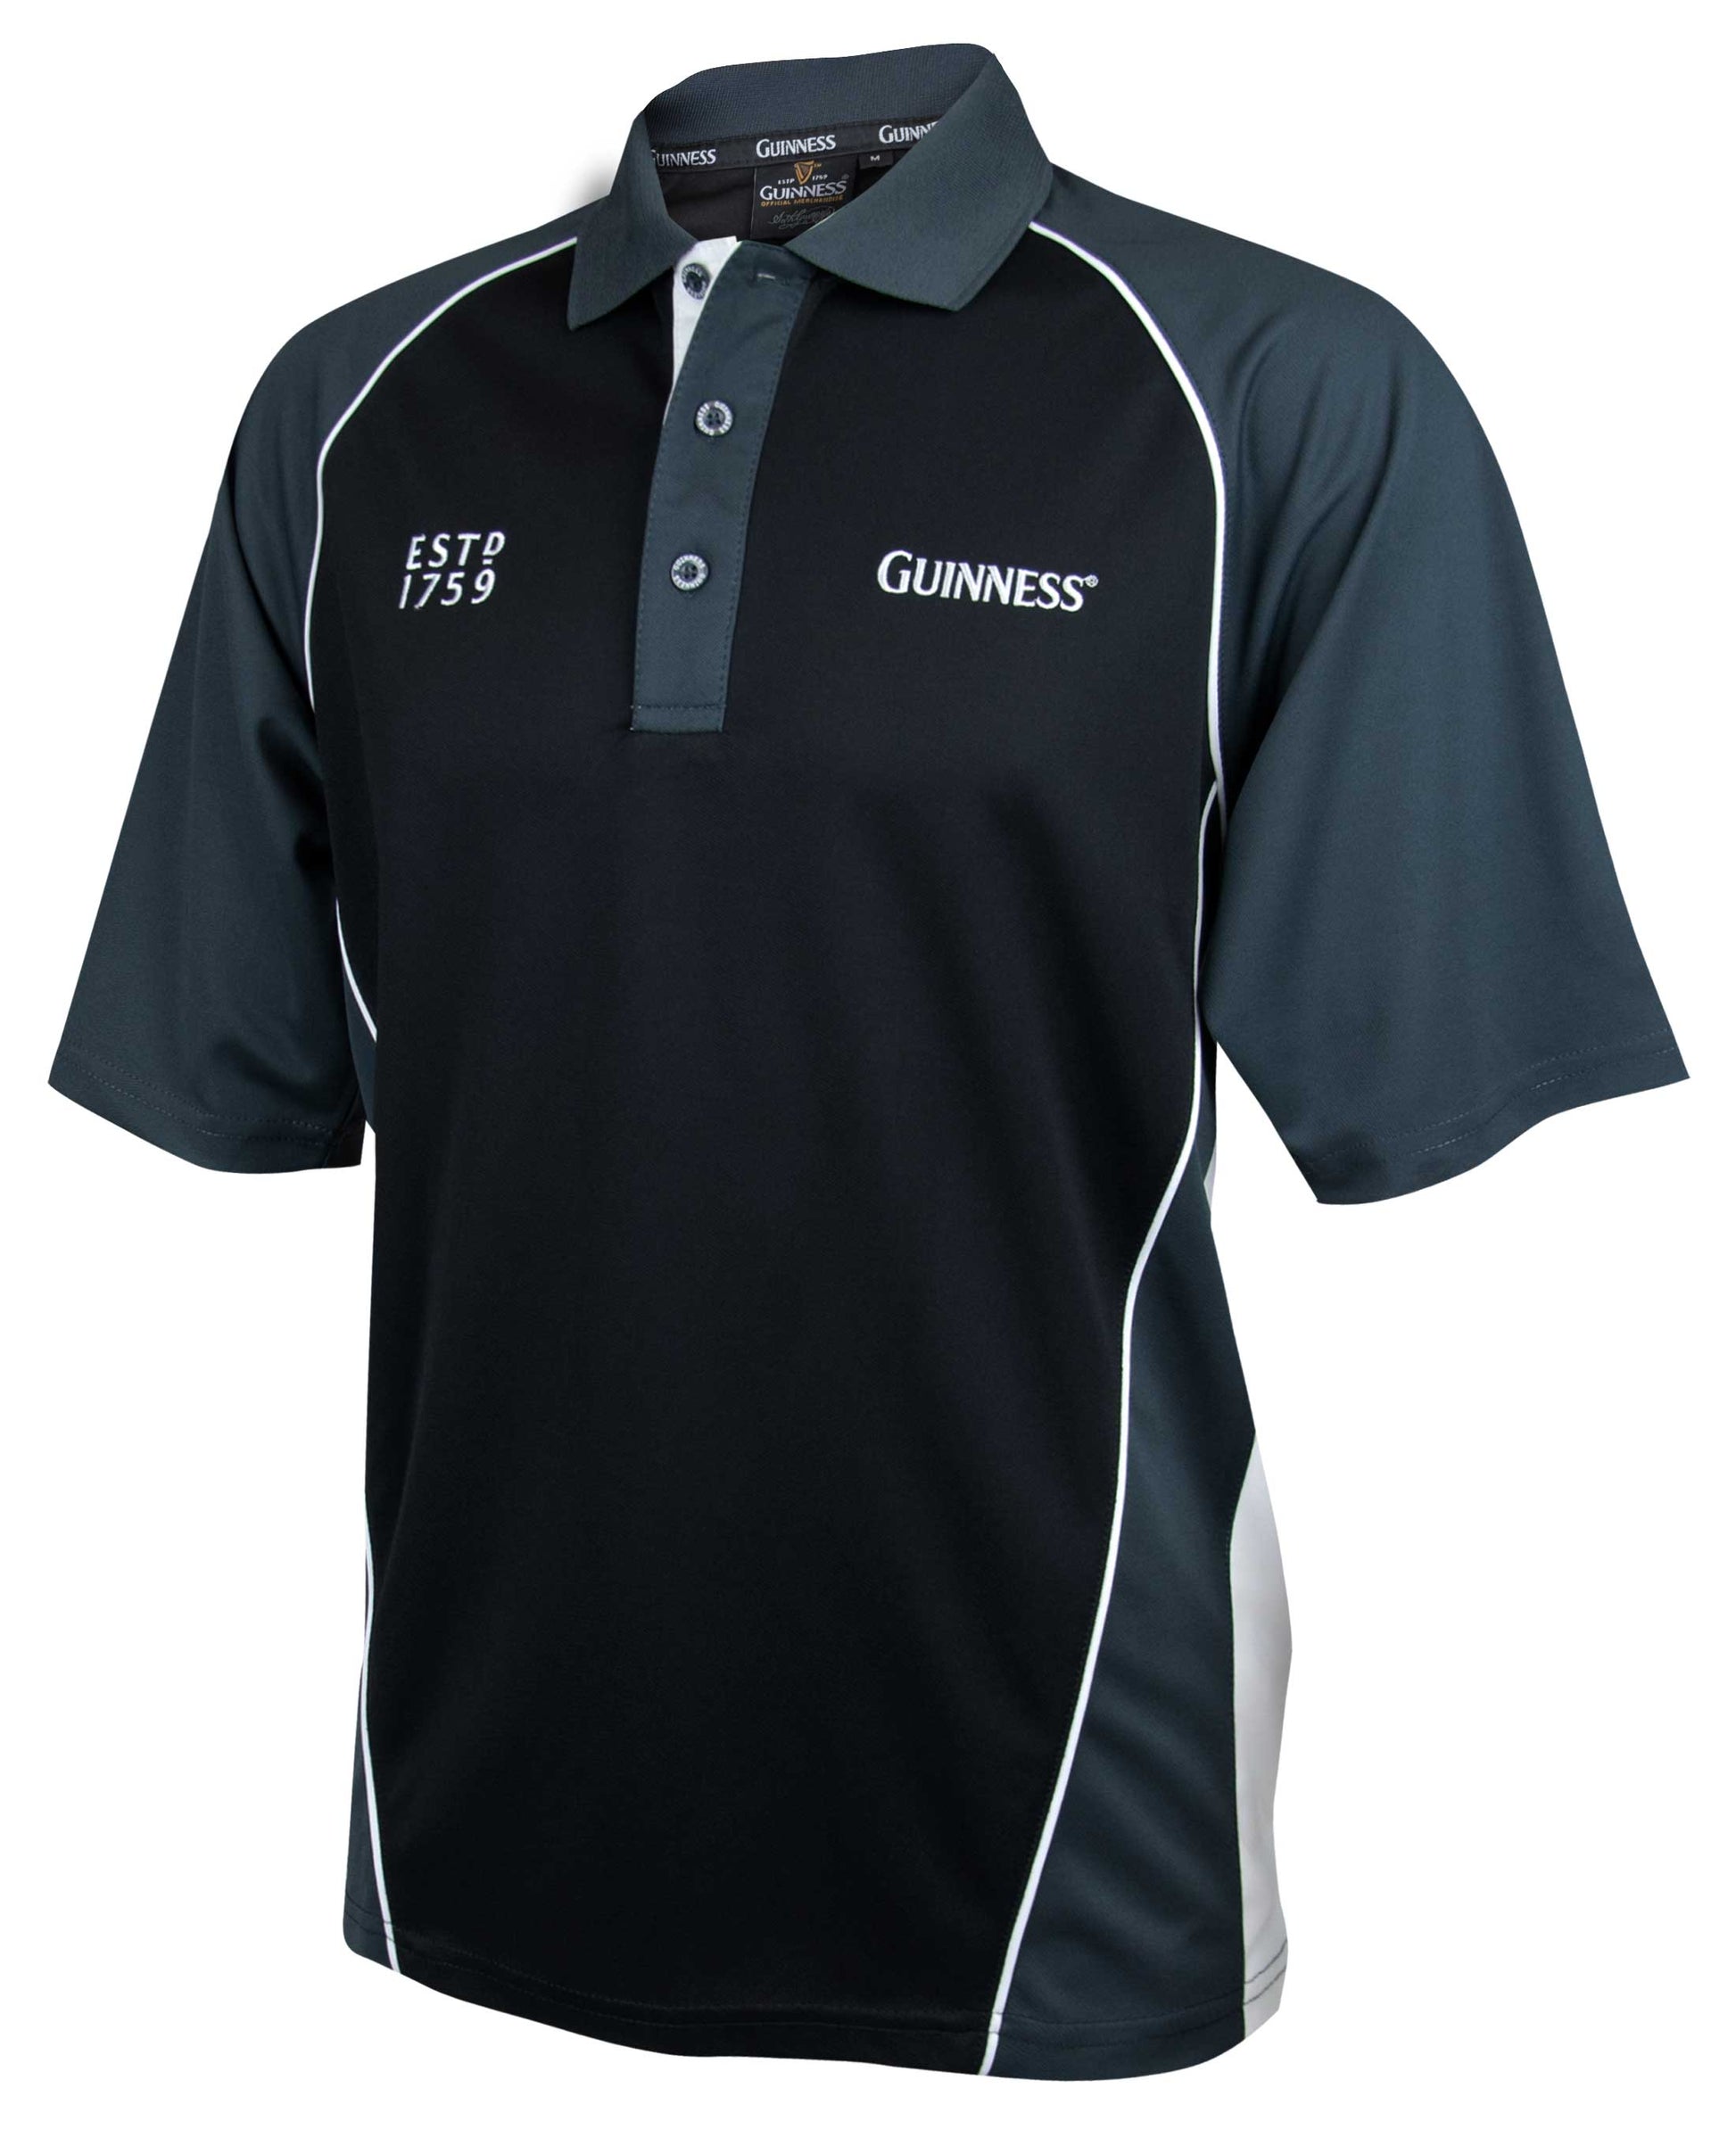 A black and white Guinness Performance Golf Shirt with the embroidered Guinness® logo.